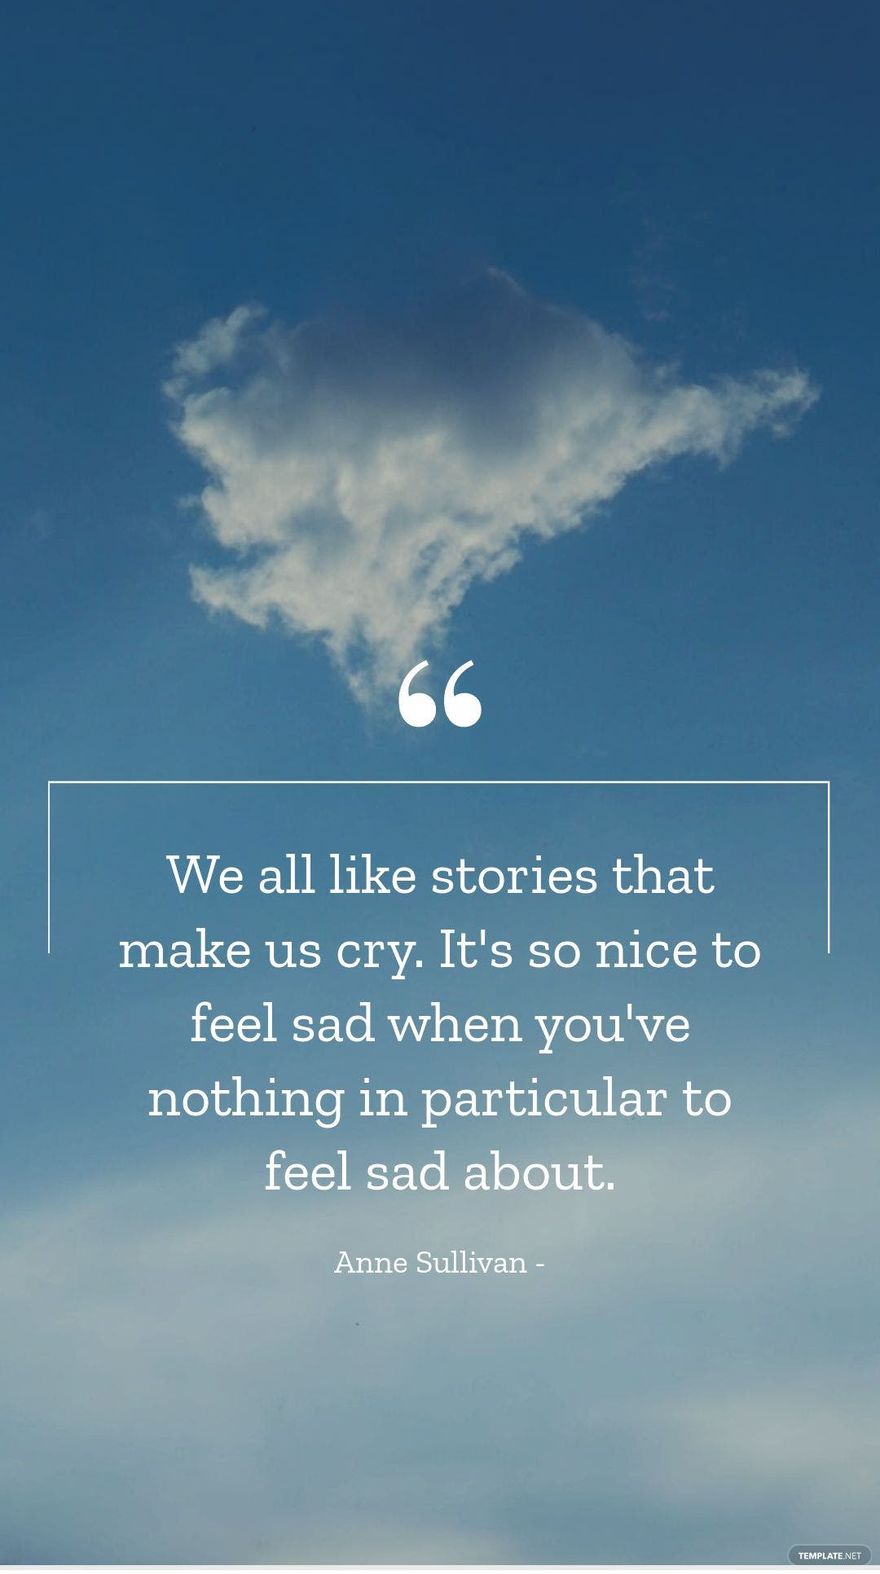 Anne Sullivan - We all like stories that make us cry. It's so nice to feel sad when you've nothing in particular to feel sad about.